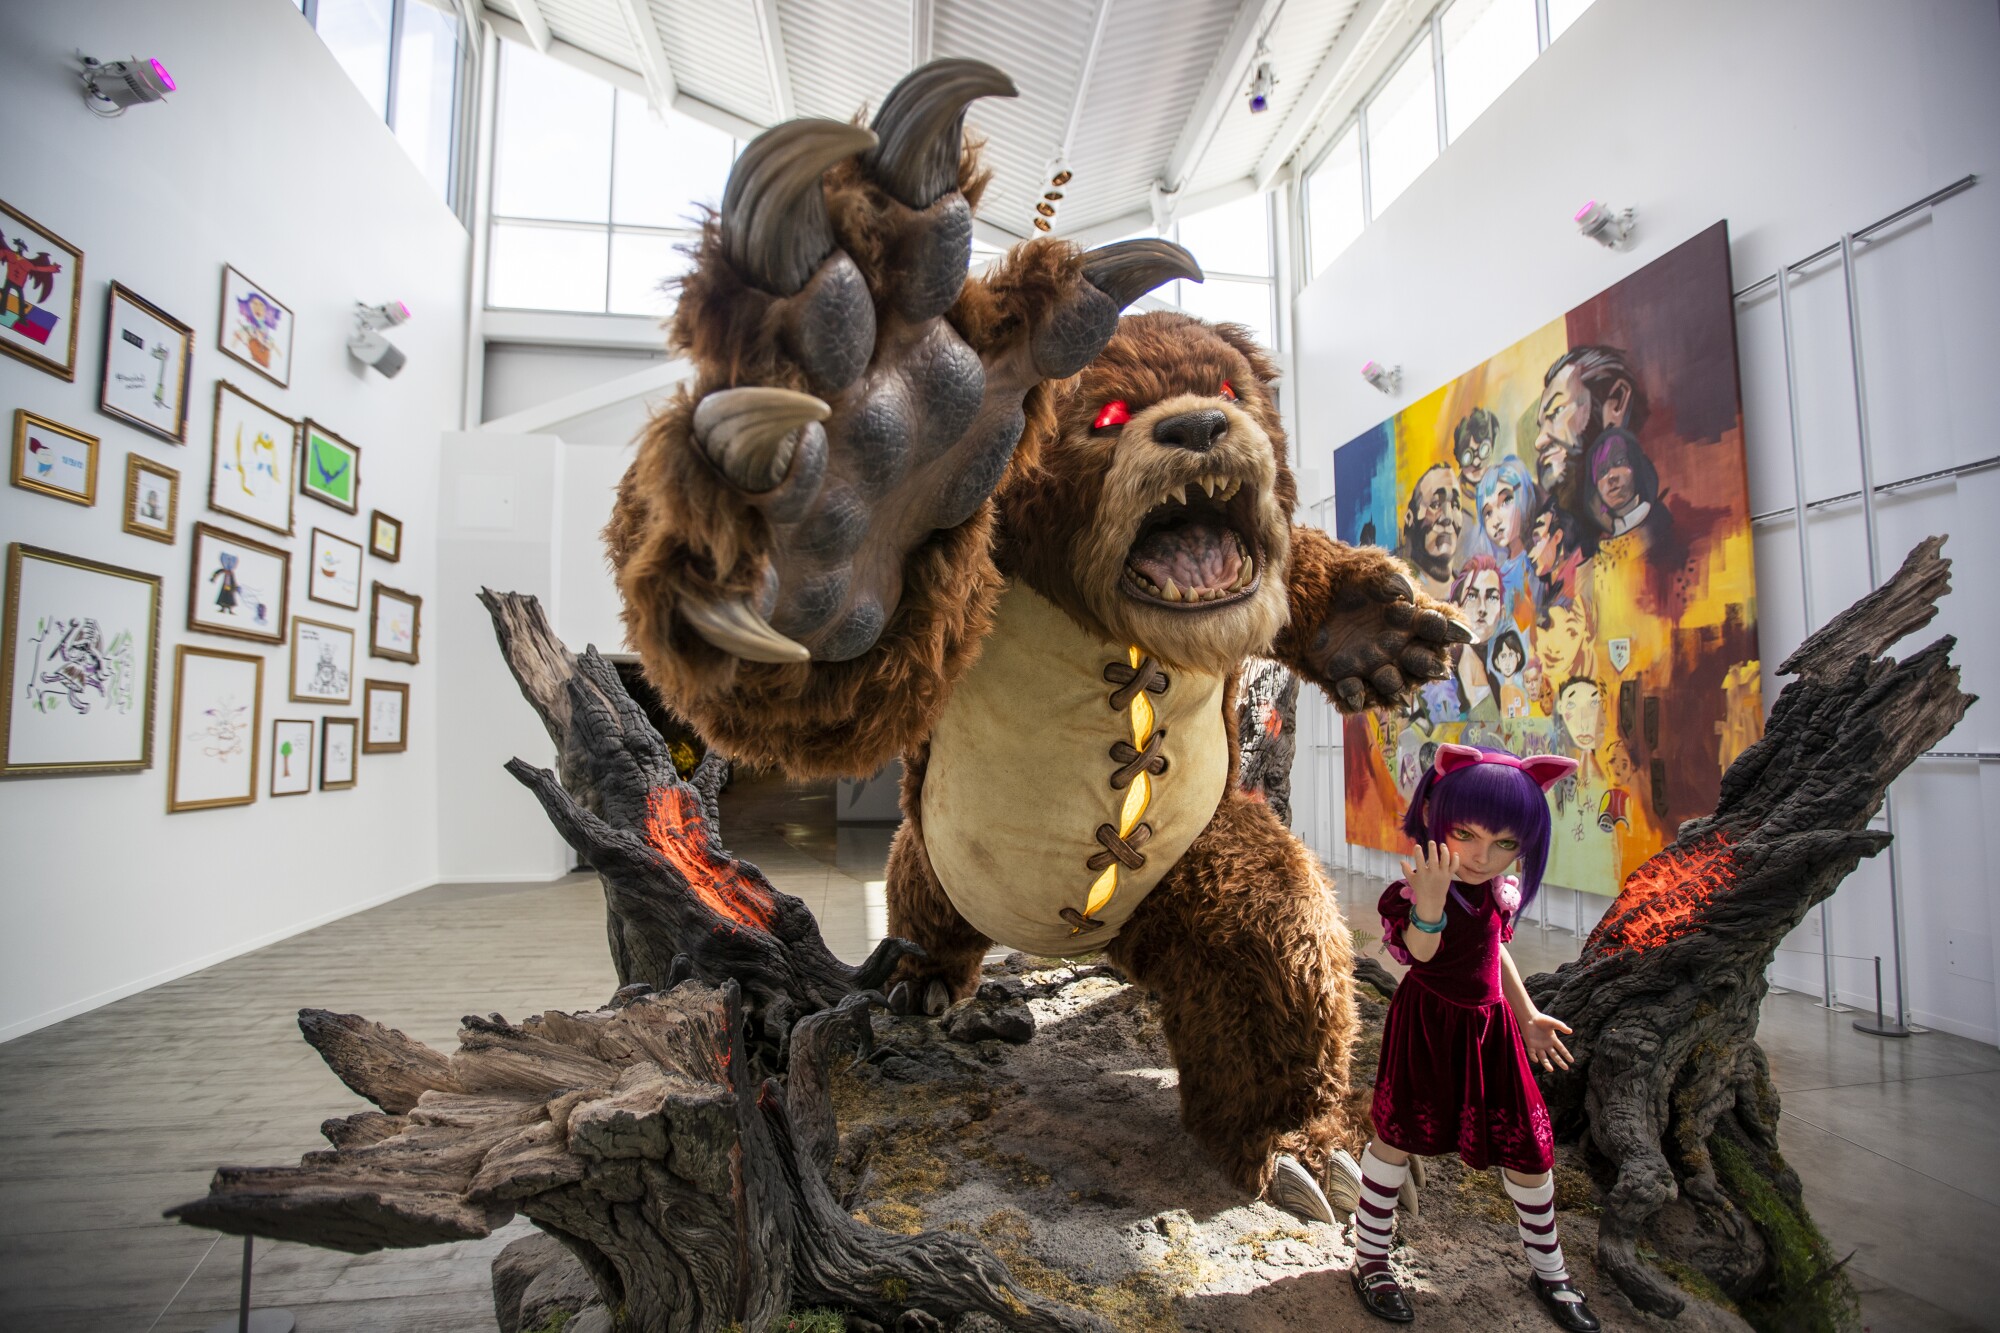 Statues of Annie and Tibbers, characters from the "League of Legends" video game